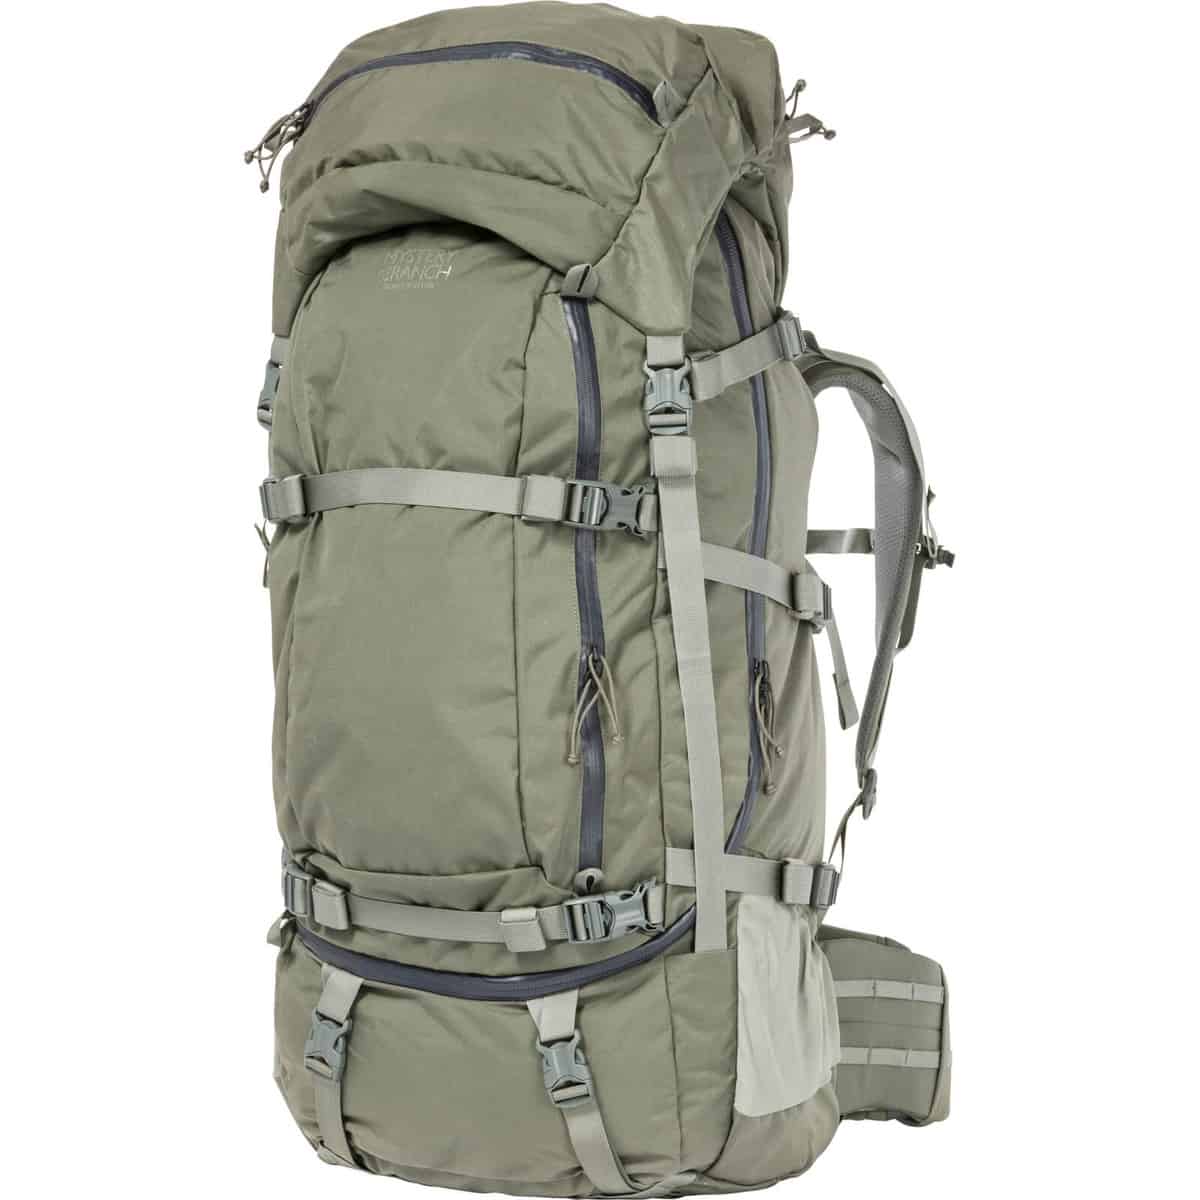 888564177044 Mystery Ranch Beartooth 80 Hunting Backpack Foliage 3 Quarter